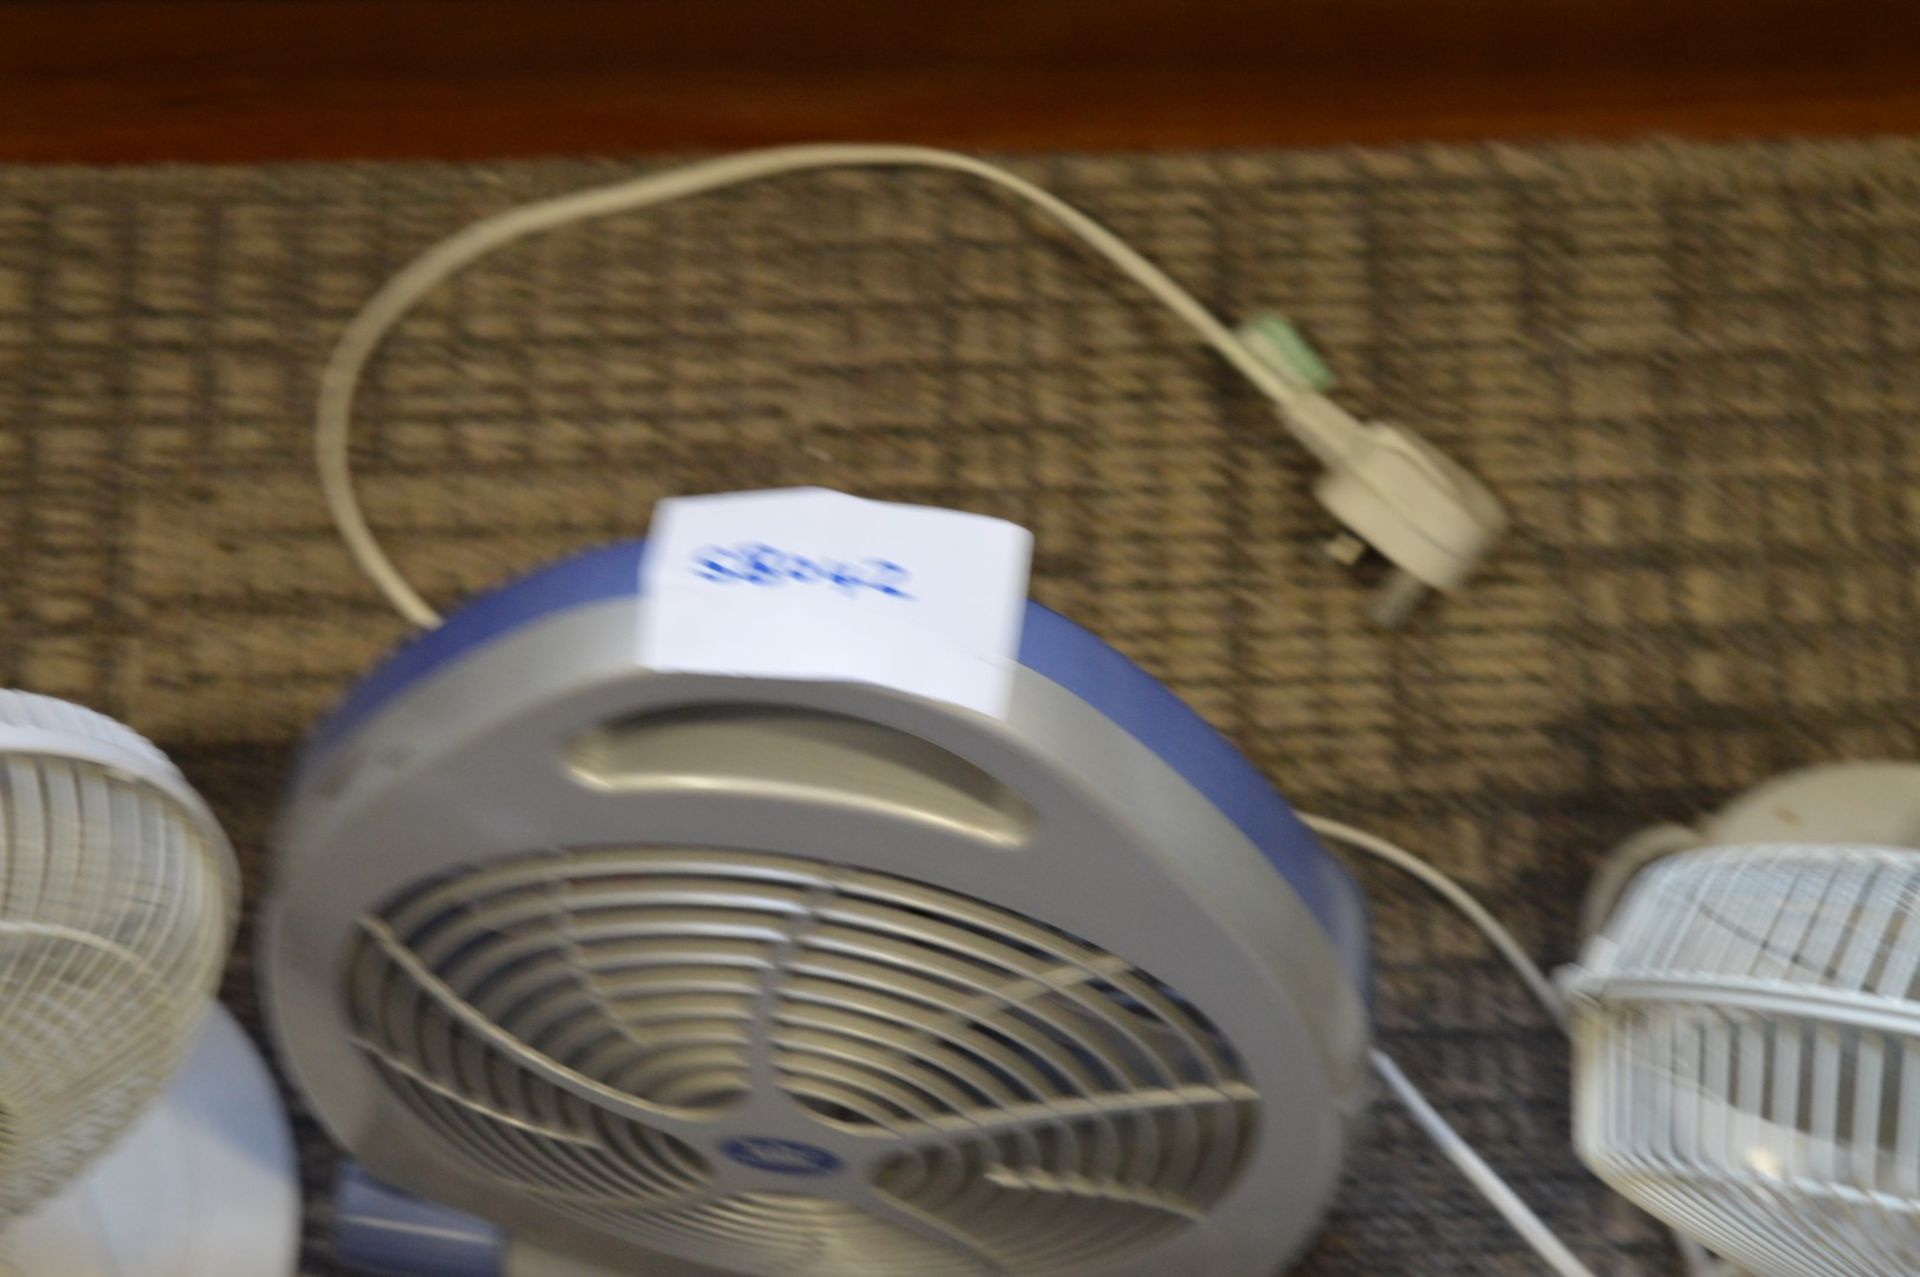 6 x Assorted Desktop Fans - 240v - Ideal For Office Environment - Ref SB042 - CL106 - Location: - Image 3 of 4